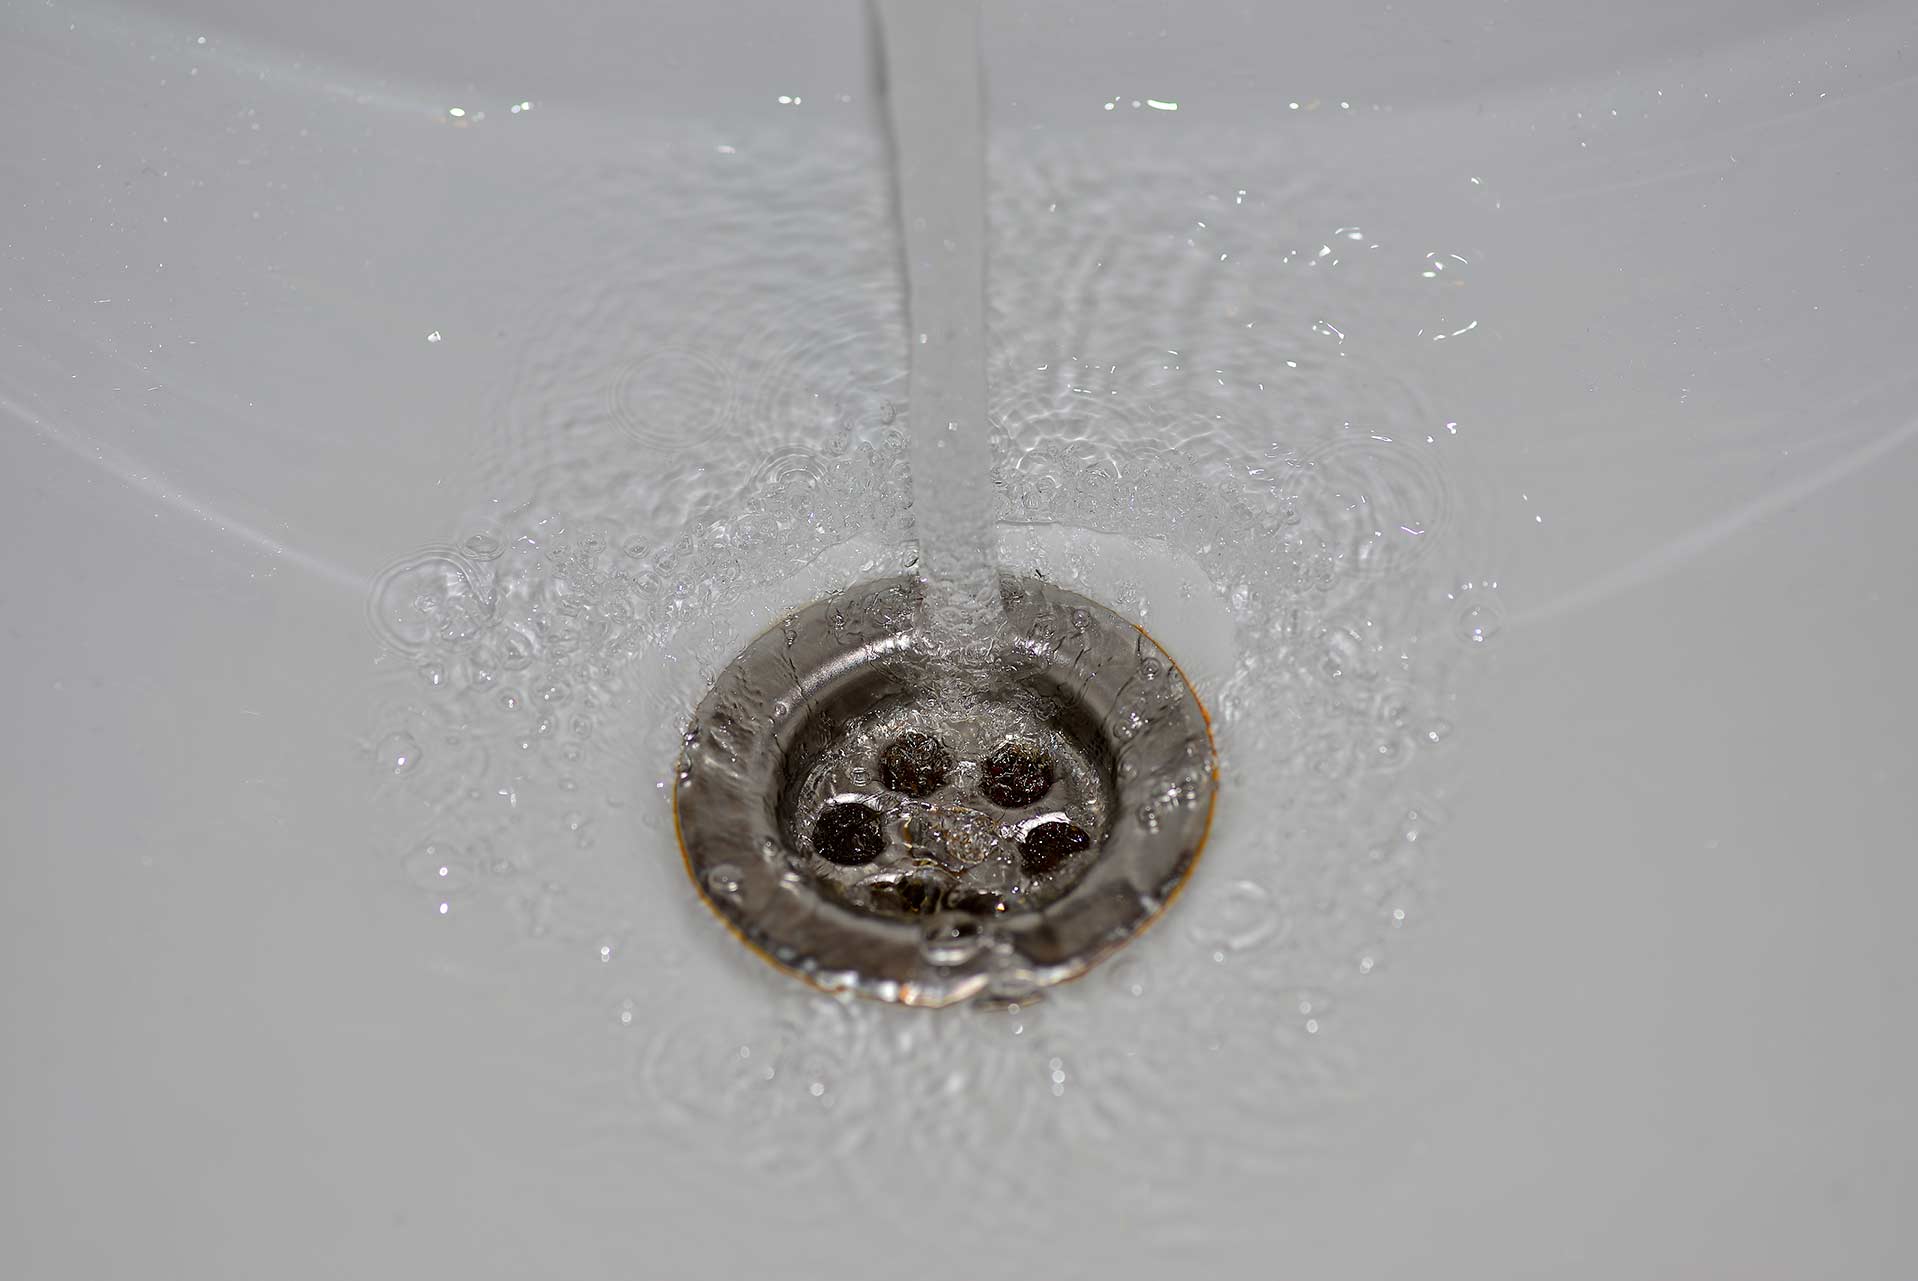 A2B Drains provides services to unblock blocked sinks and drains for properties in Wantage.